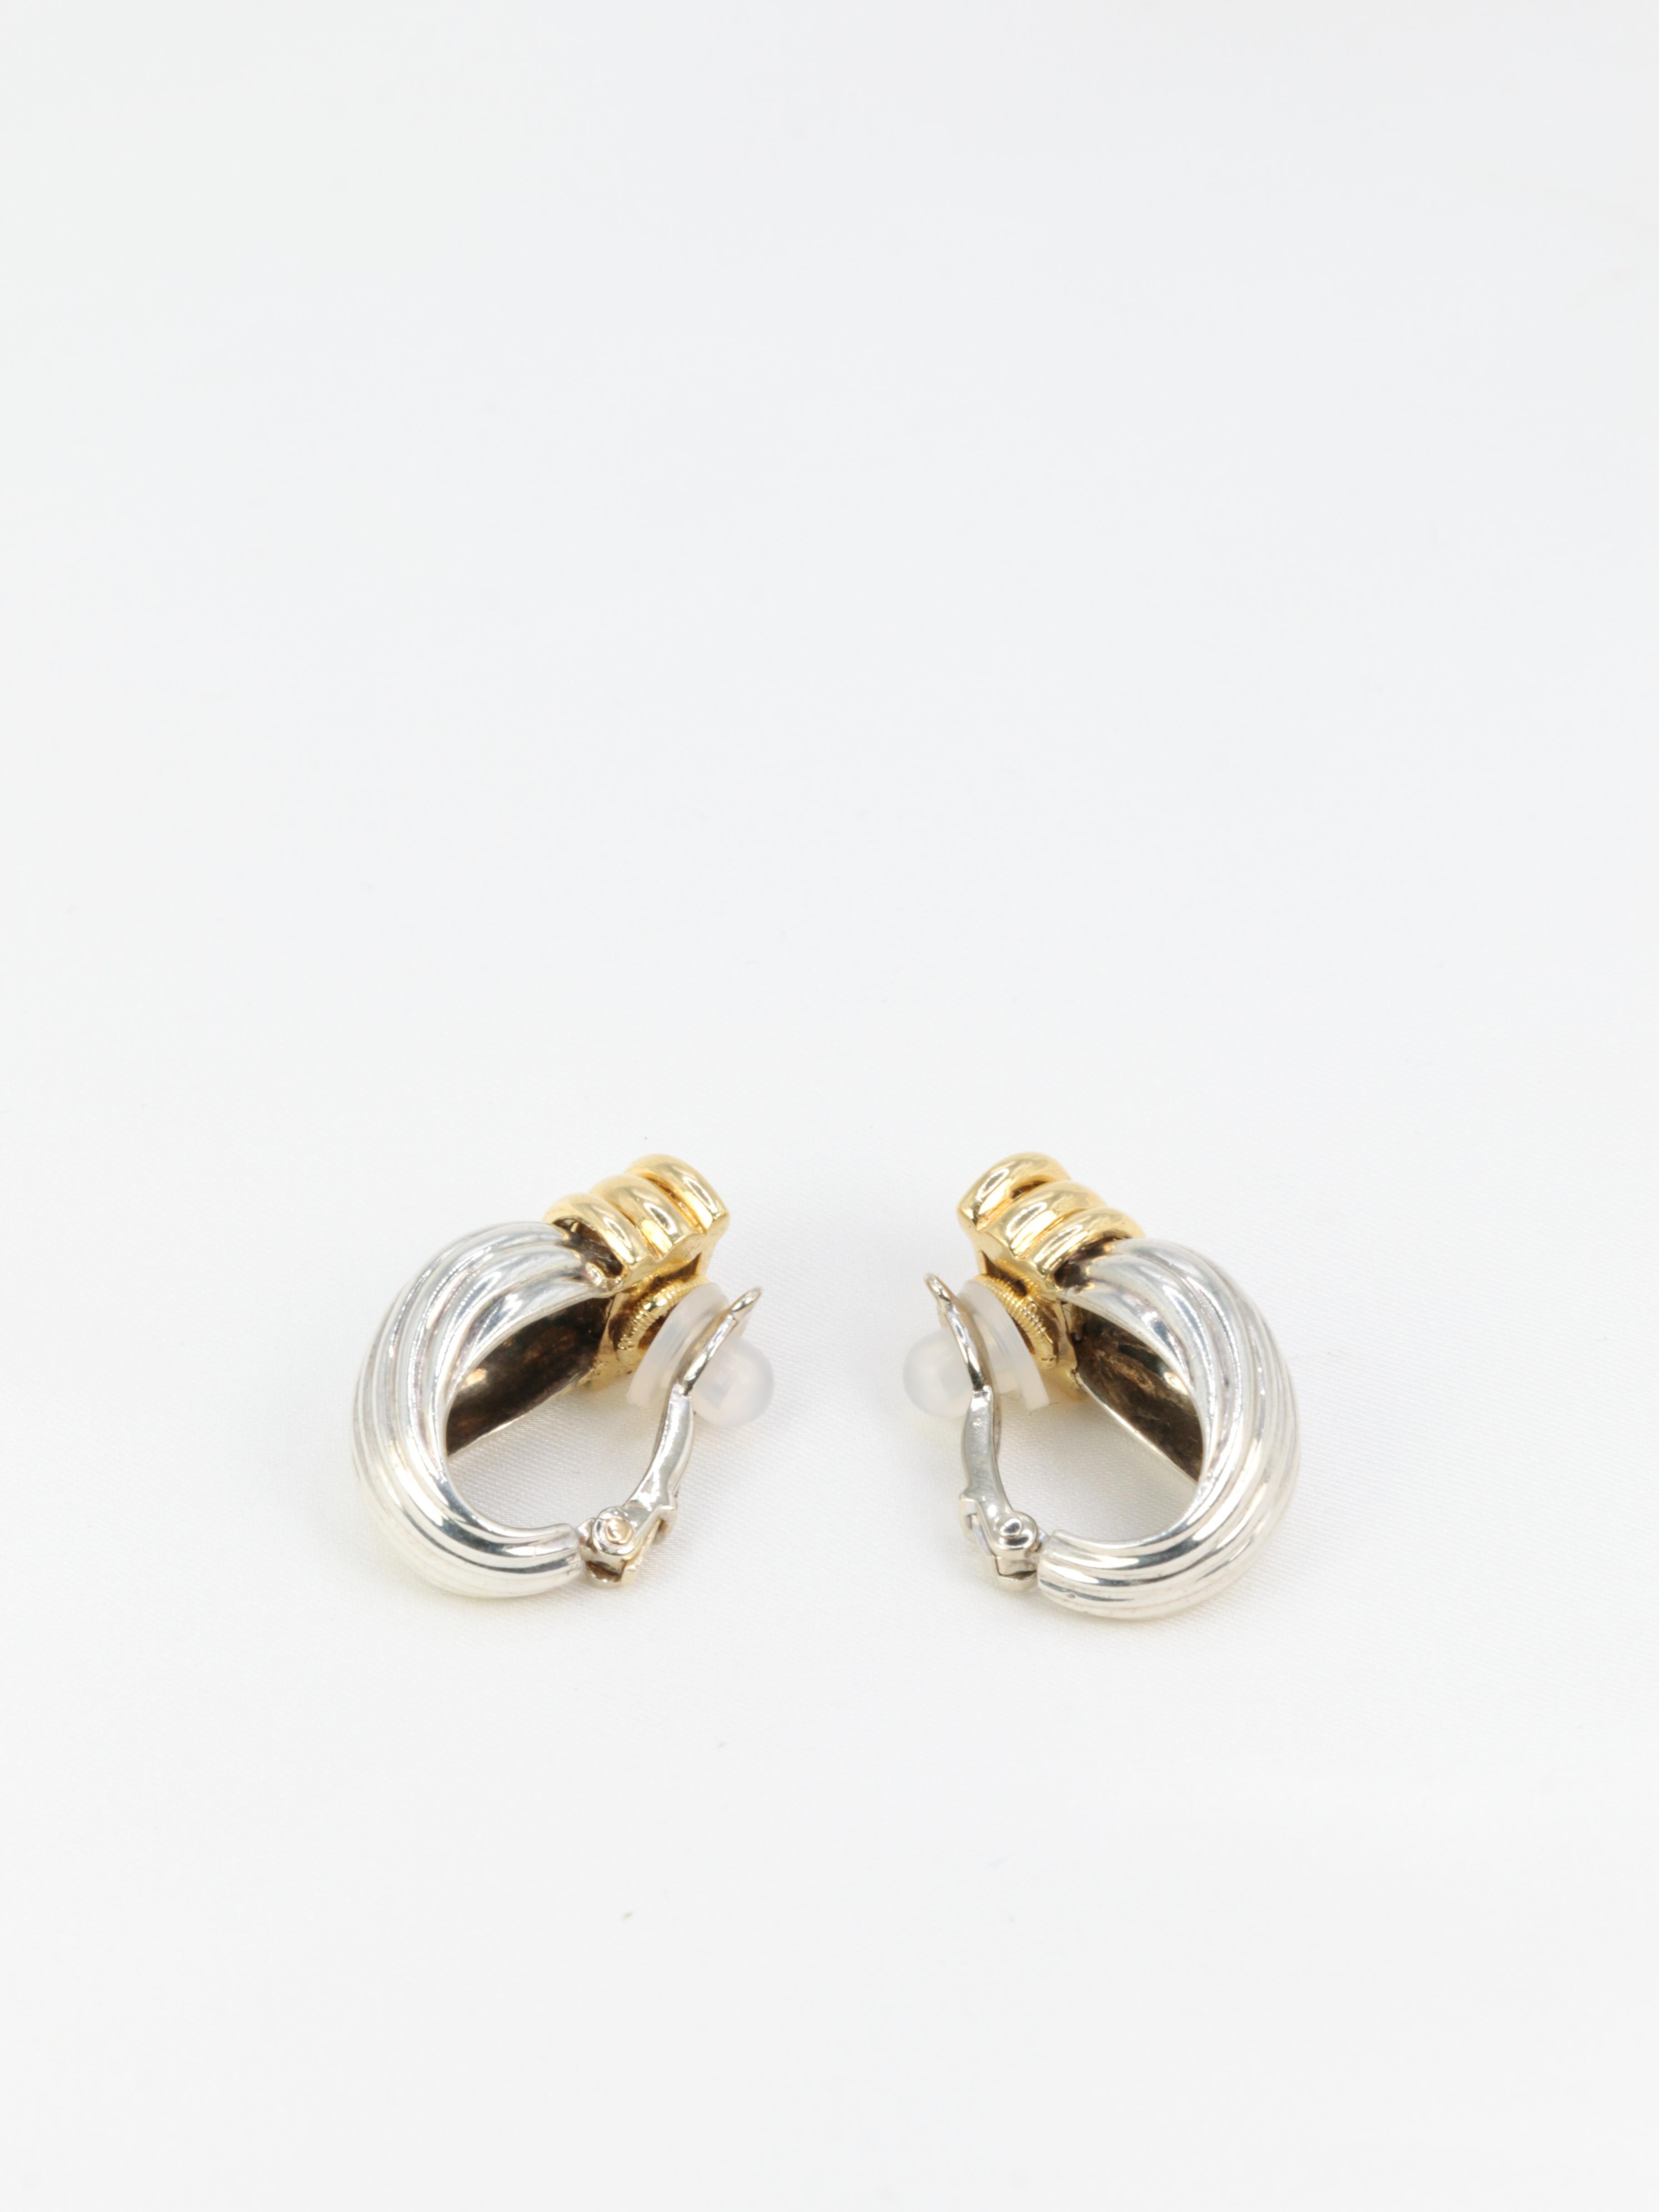 Oj Perrin Gold and Silver Earrings For Sale 1